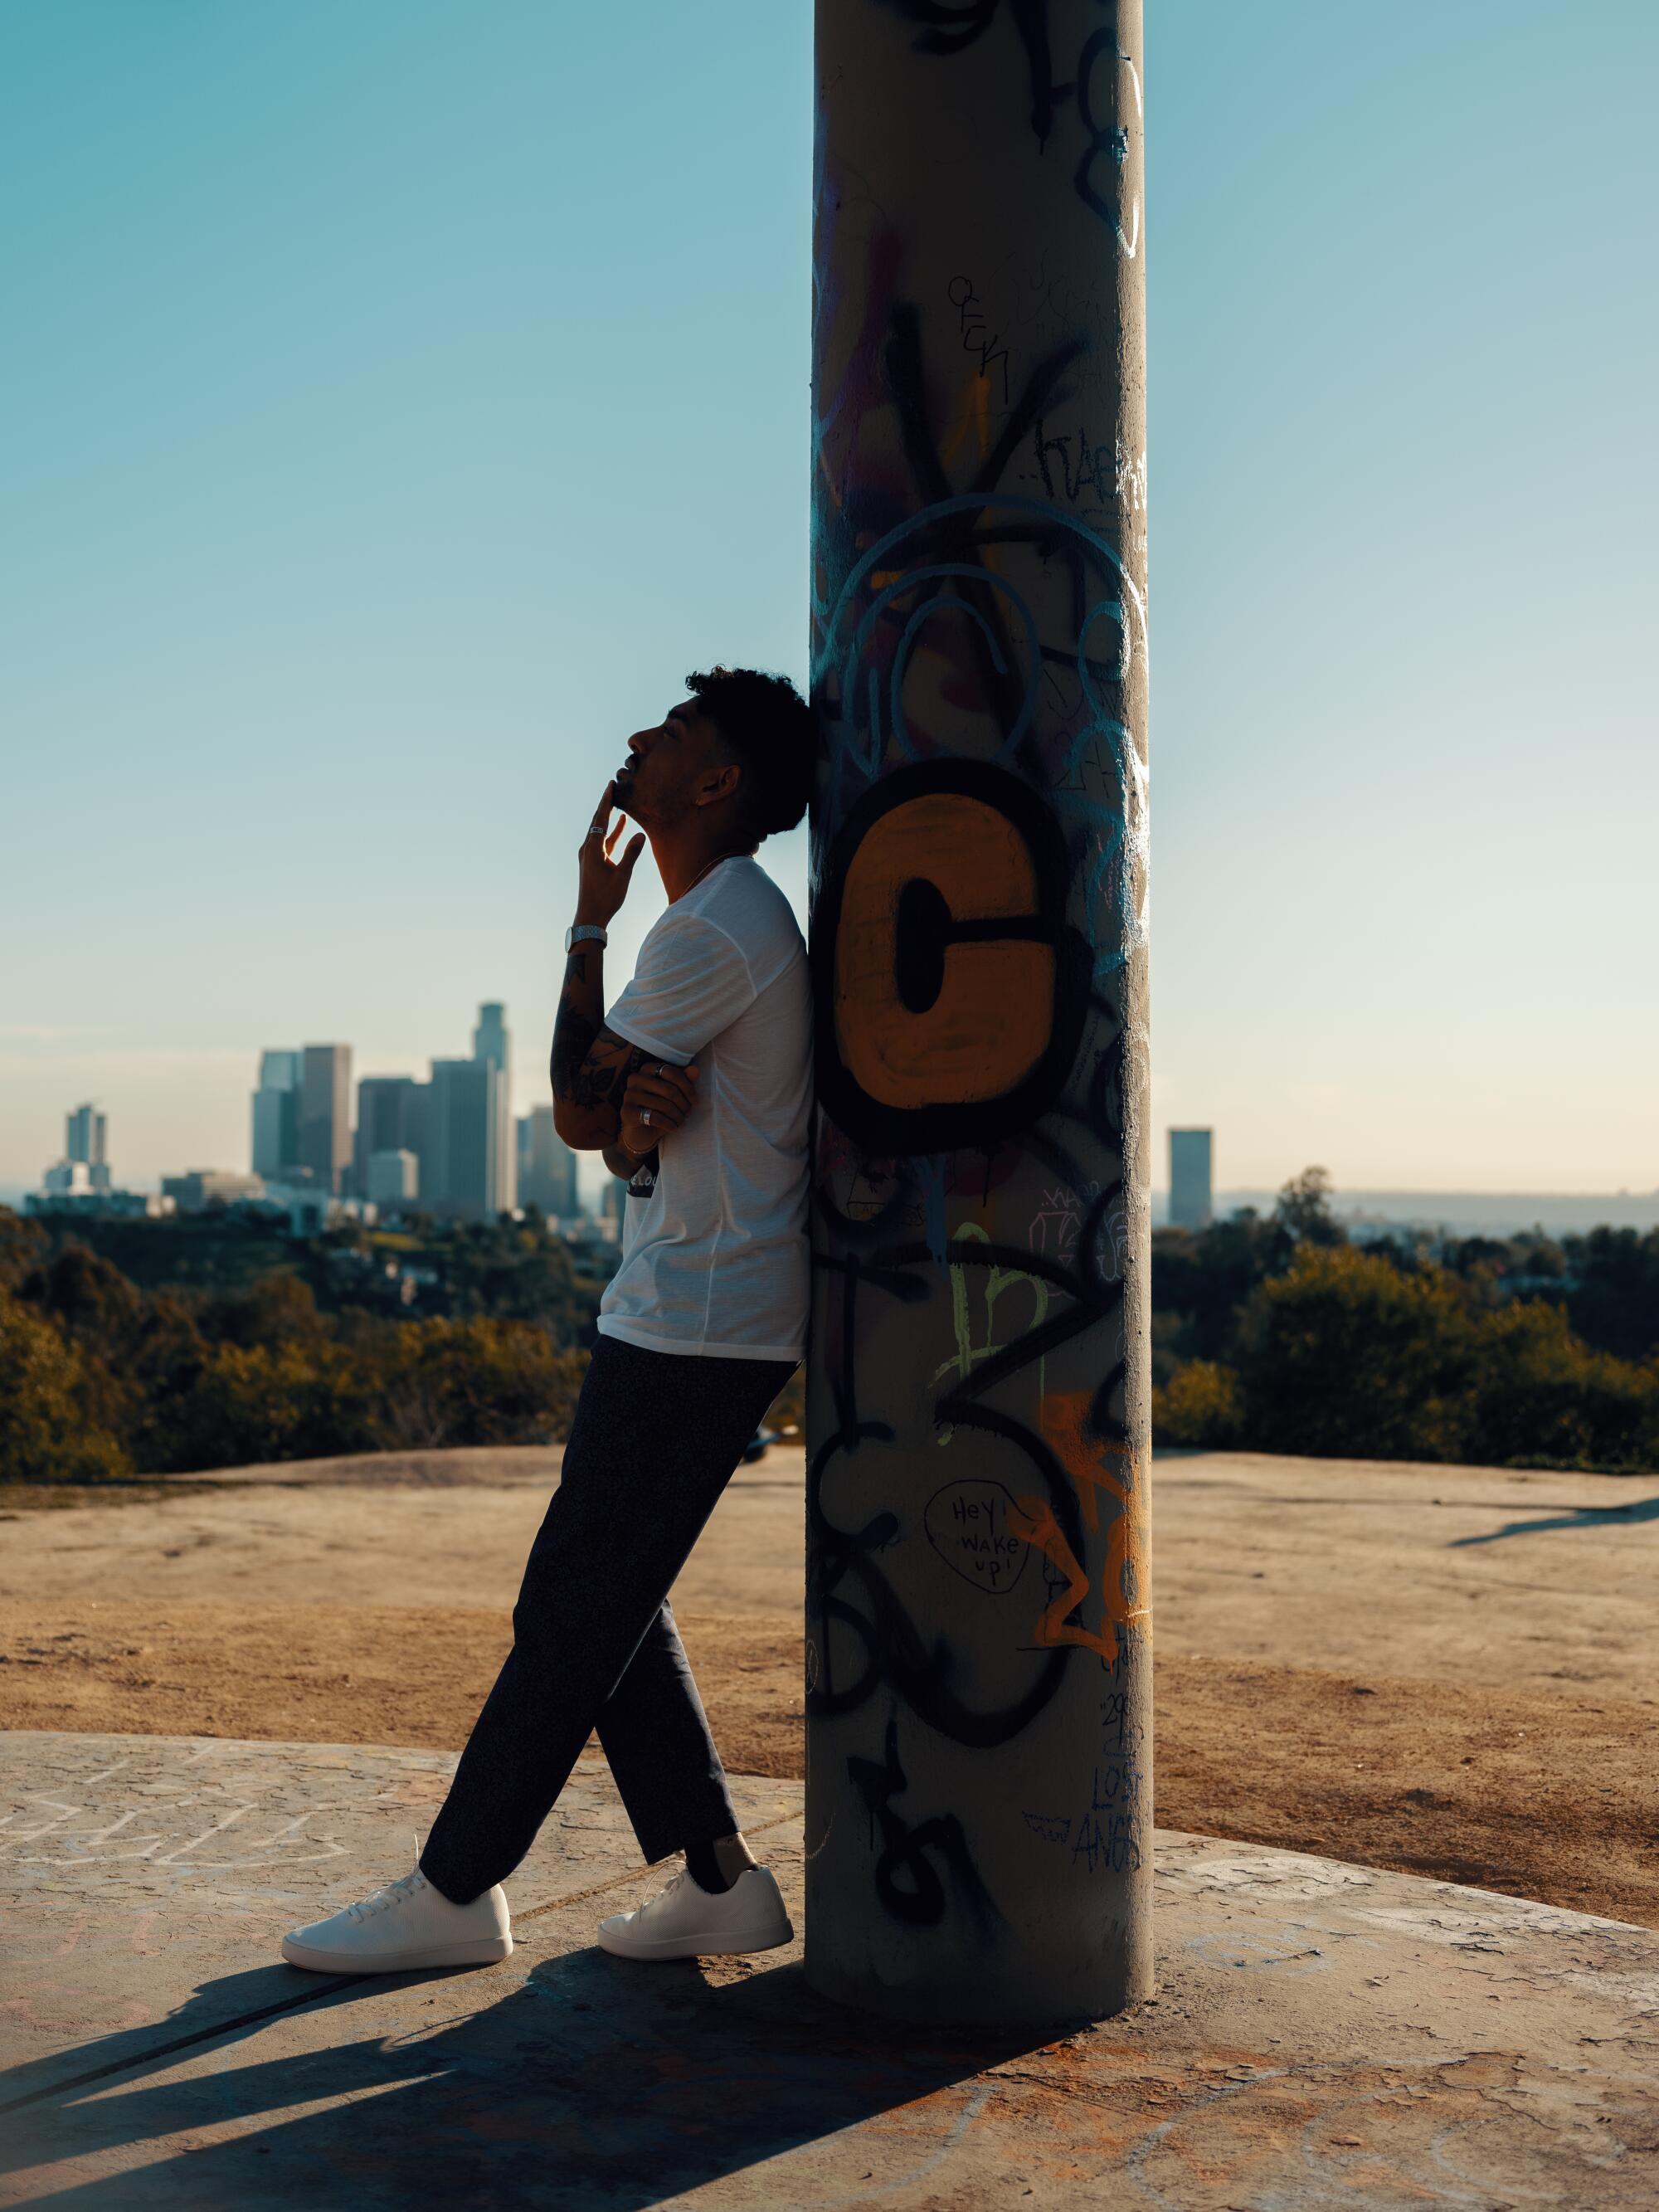 A man leans against a pole covered in graffiti against a view of downtown Los Angeles.